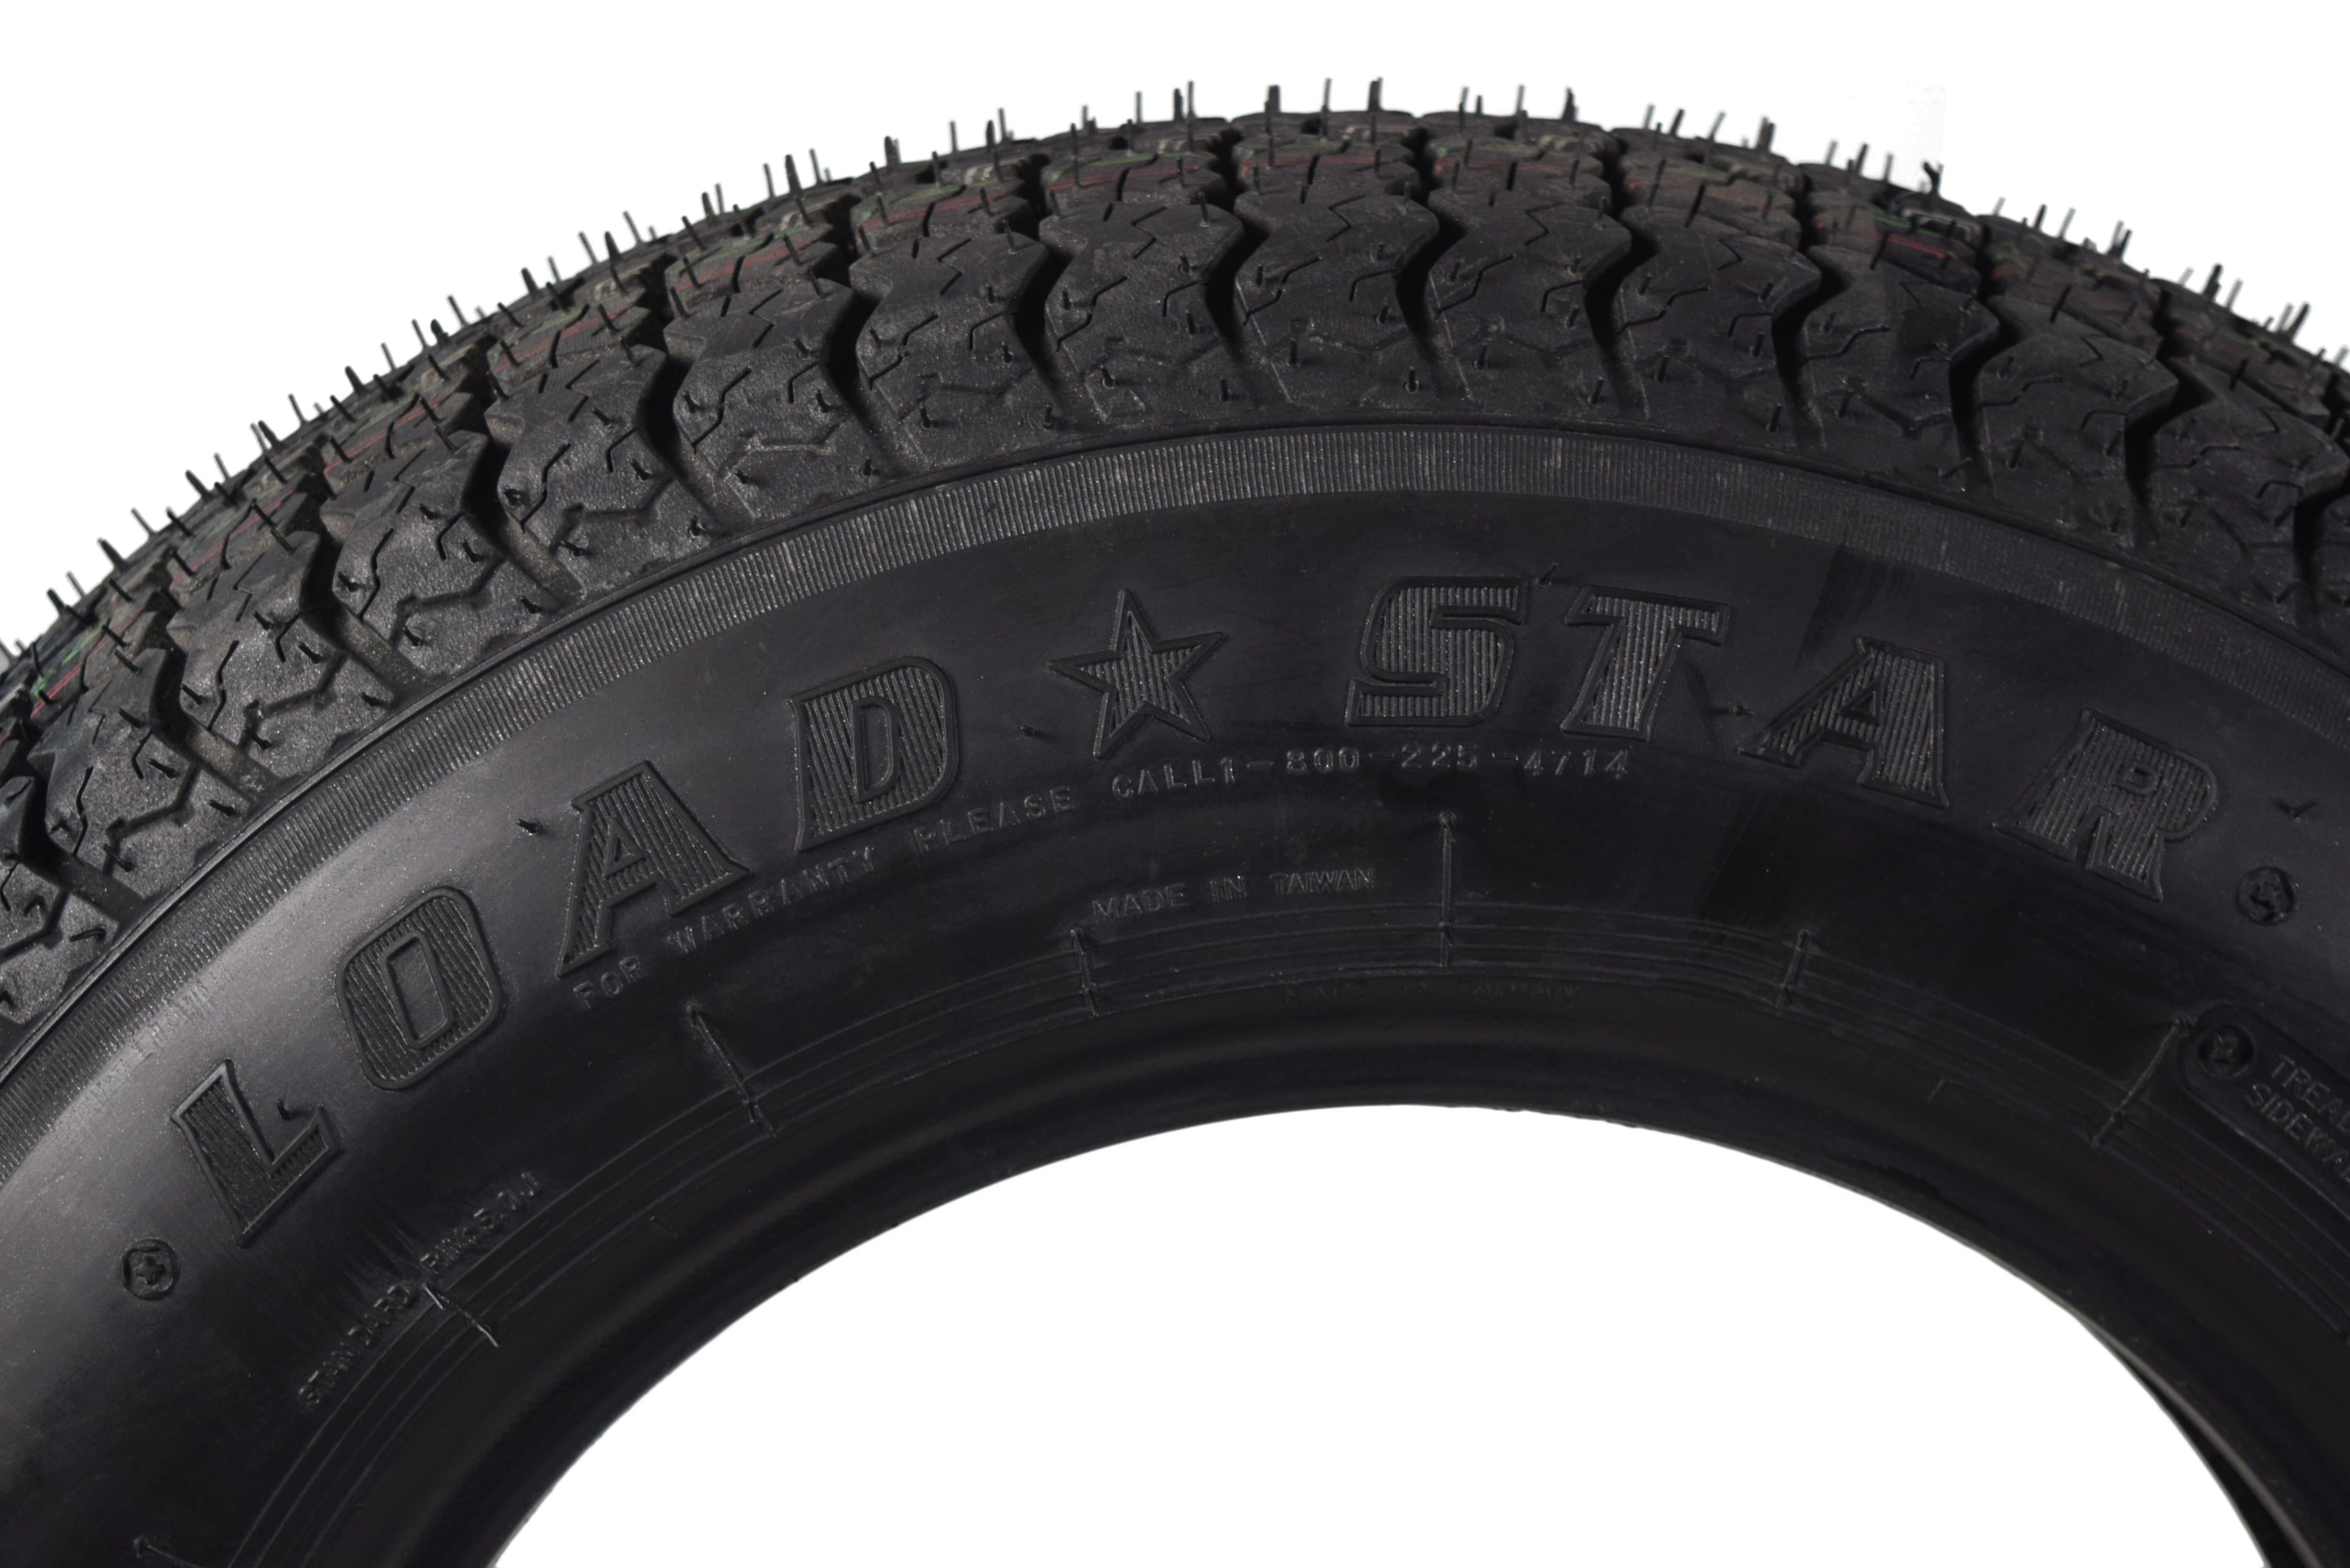 Kenda-31722002-ST175-80D13-Load-Star-6-Ply-Tubeless-Trailer-Tire-image-4